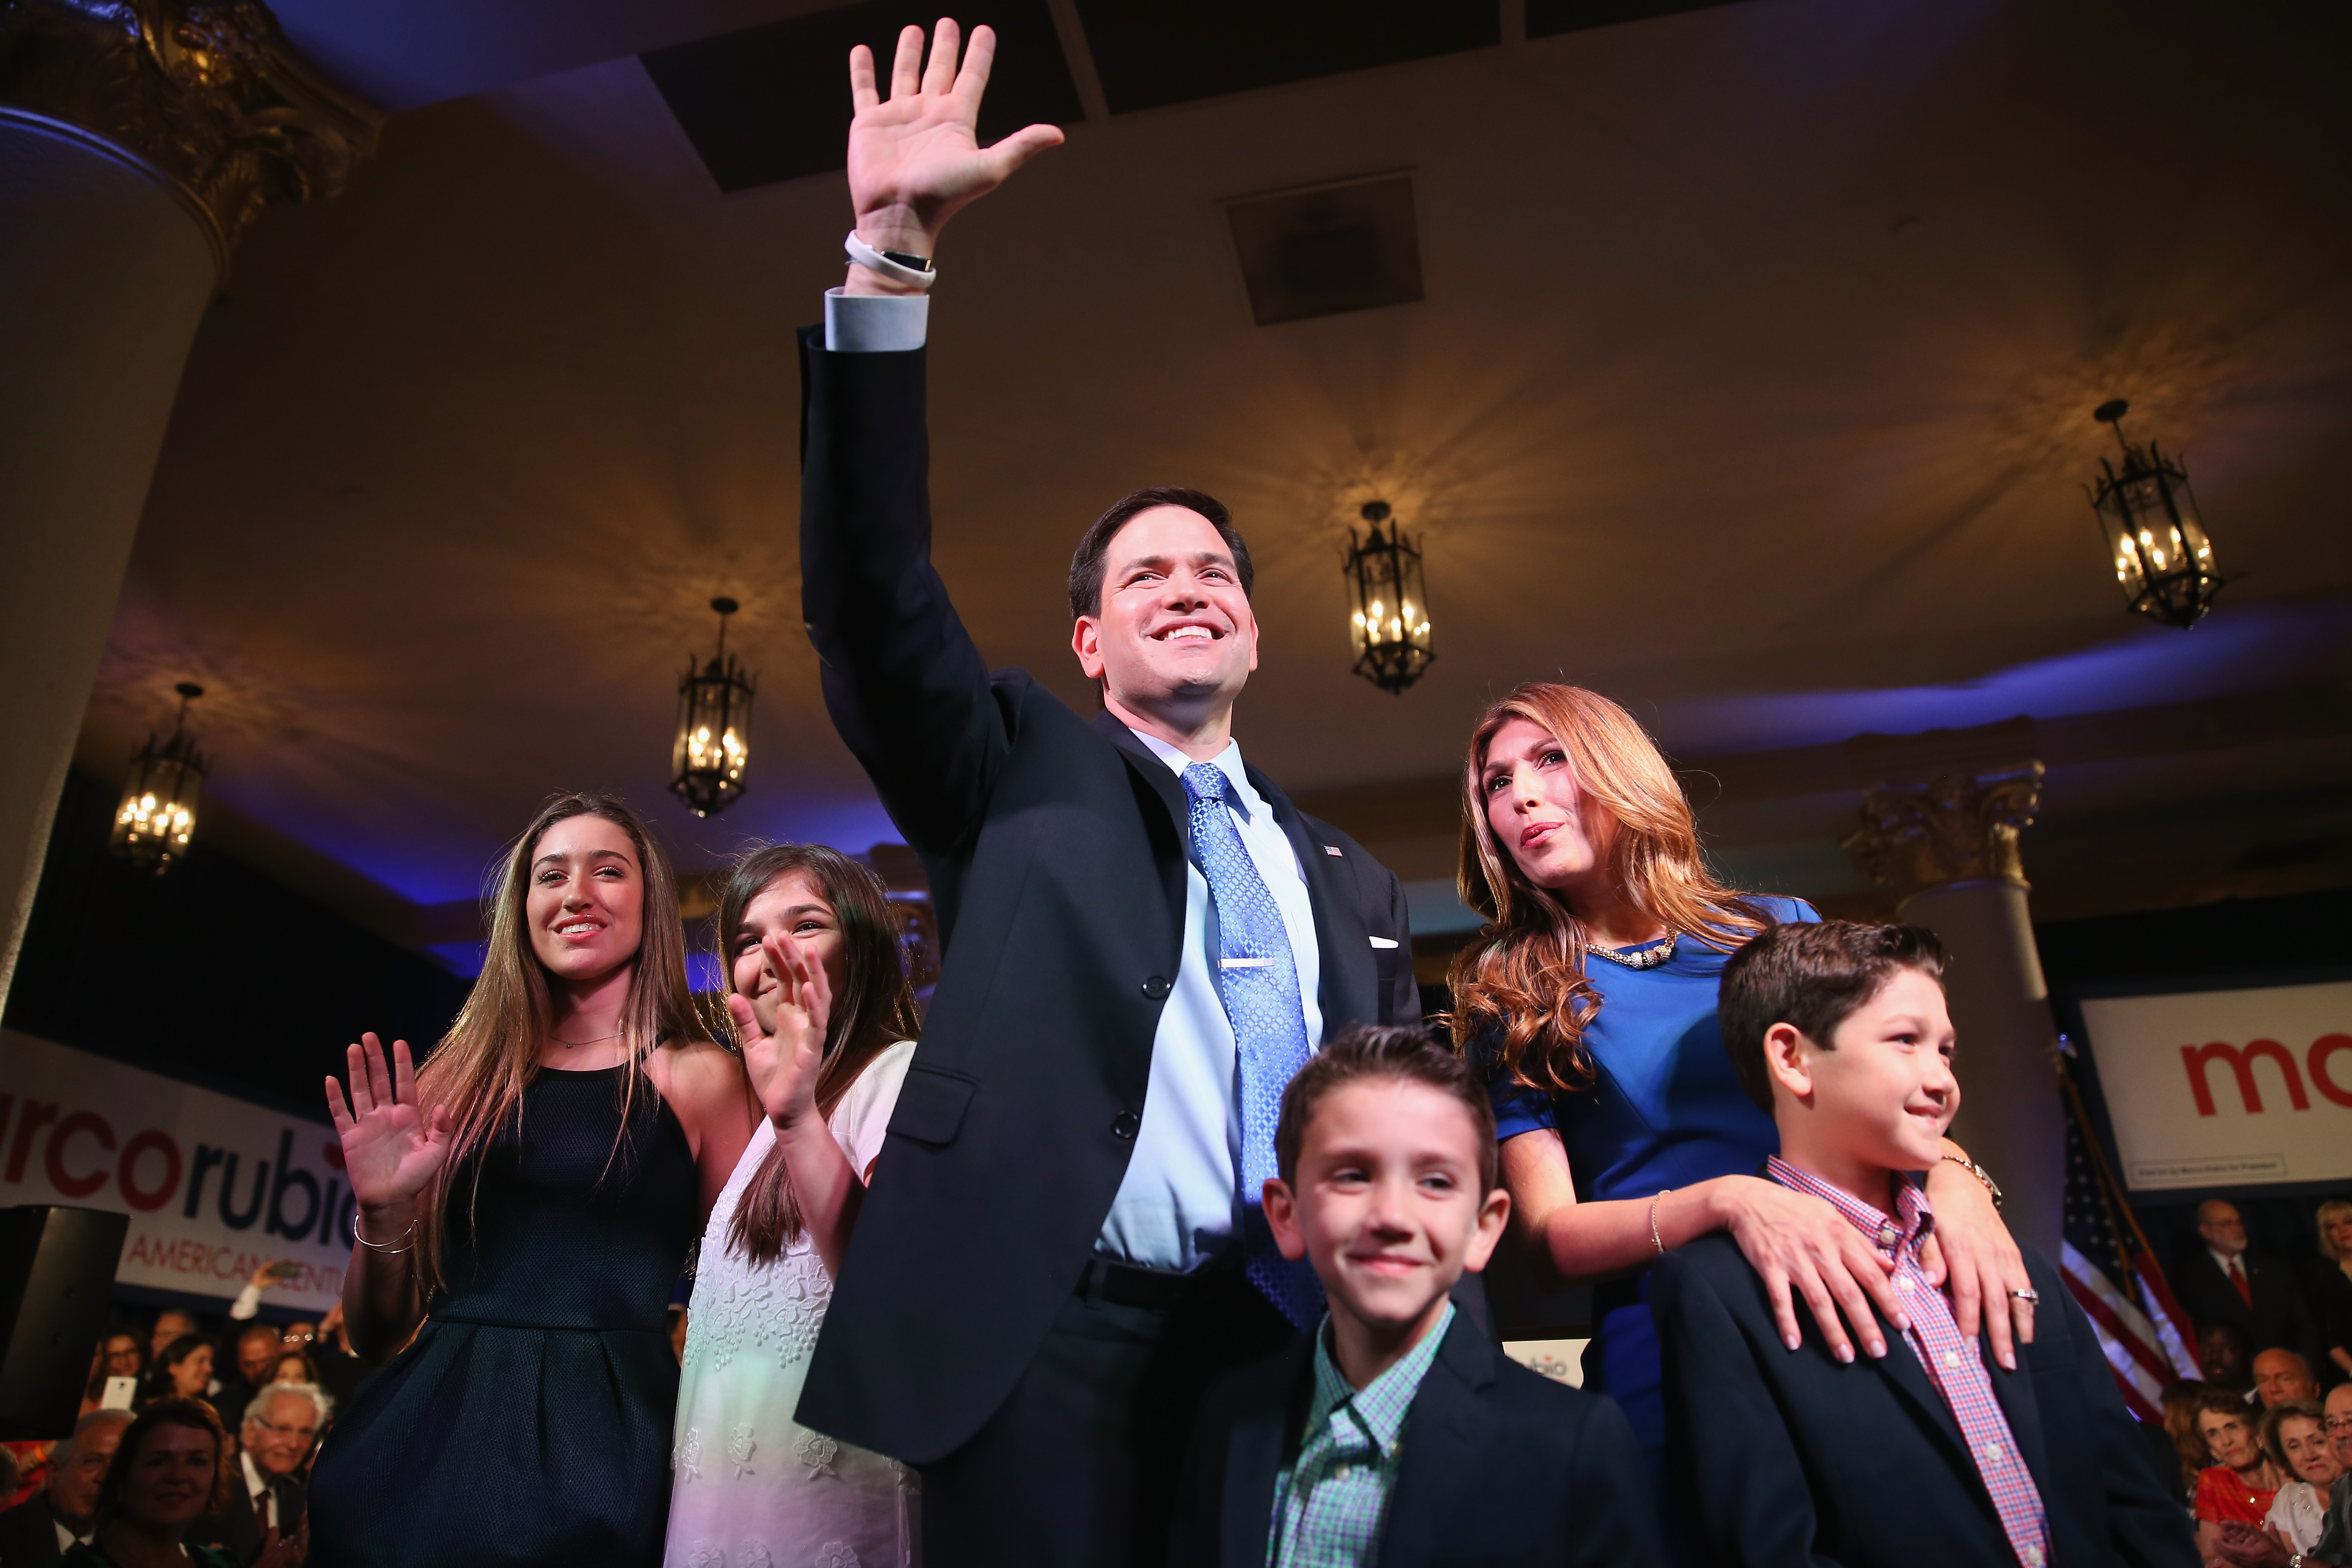 MIAMI, FL - APRIL 13: U.S. Sen. Marco Rubio (R-FL) stands with his wife, Jeanette Rubio, and children after announcing his candidacy for the Republican presidential nomination. (Getty)